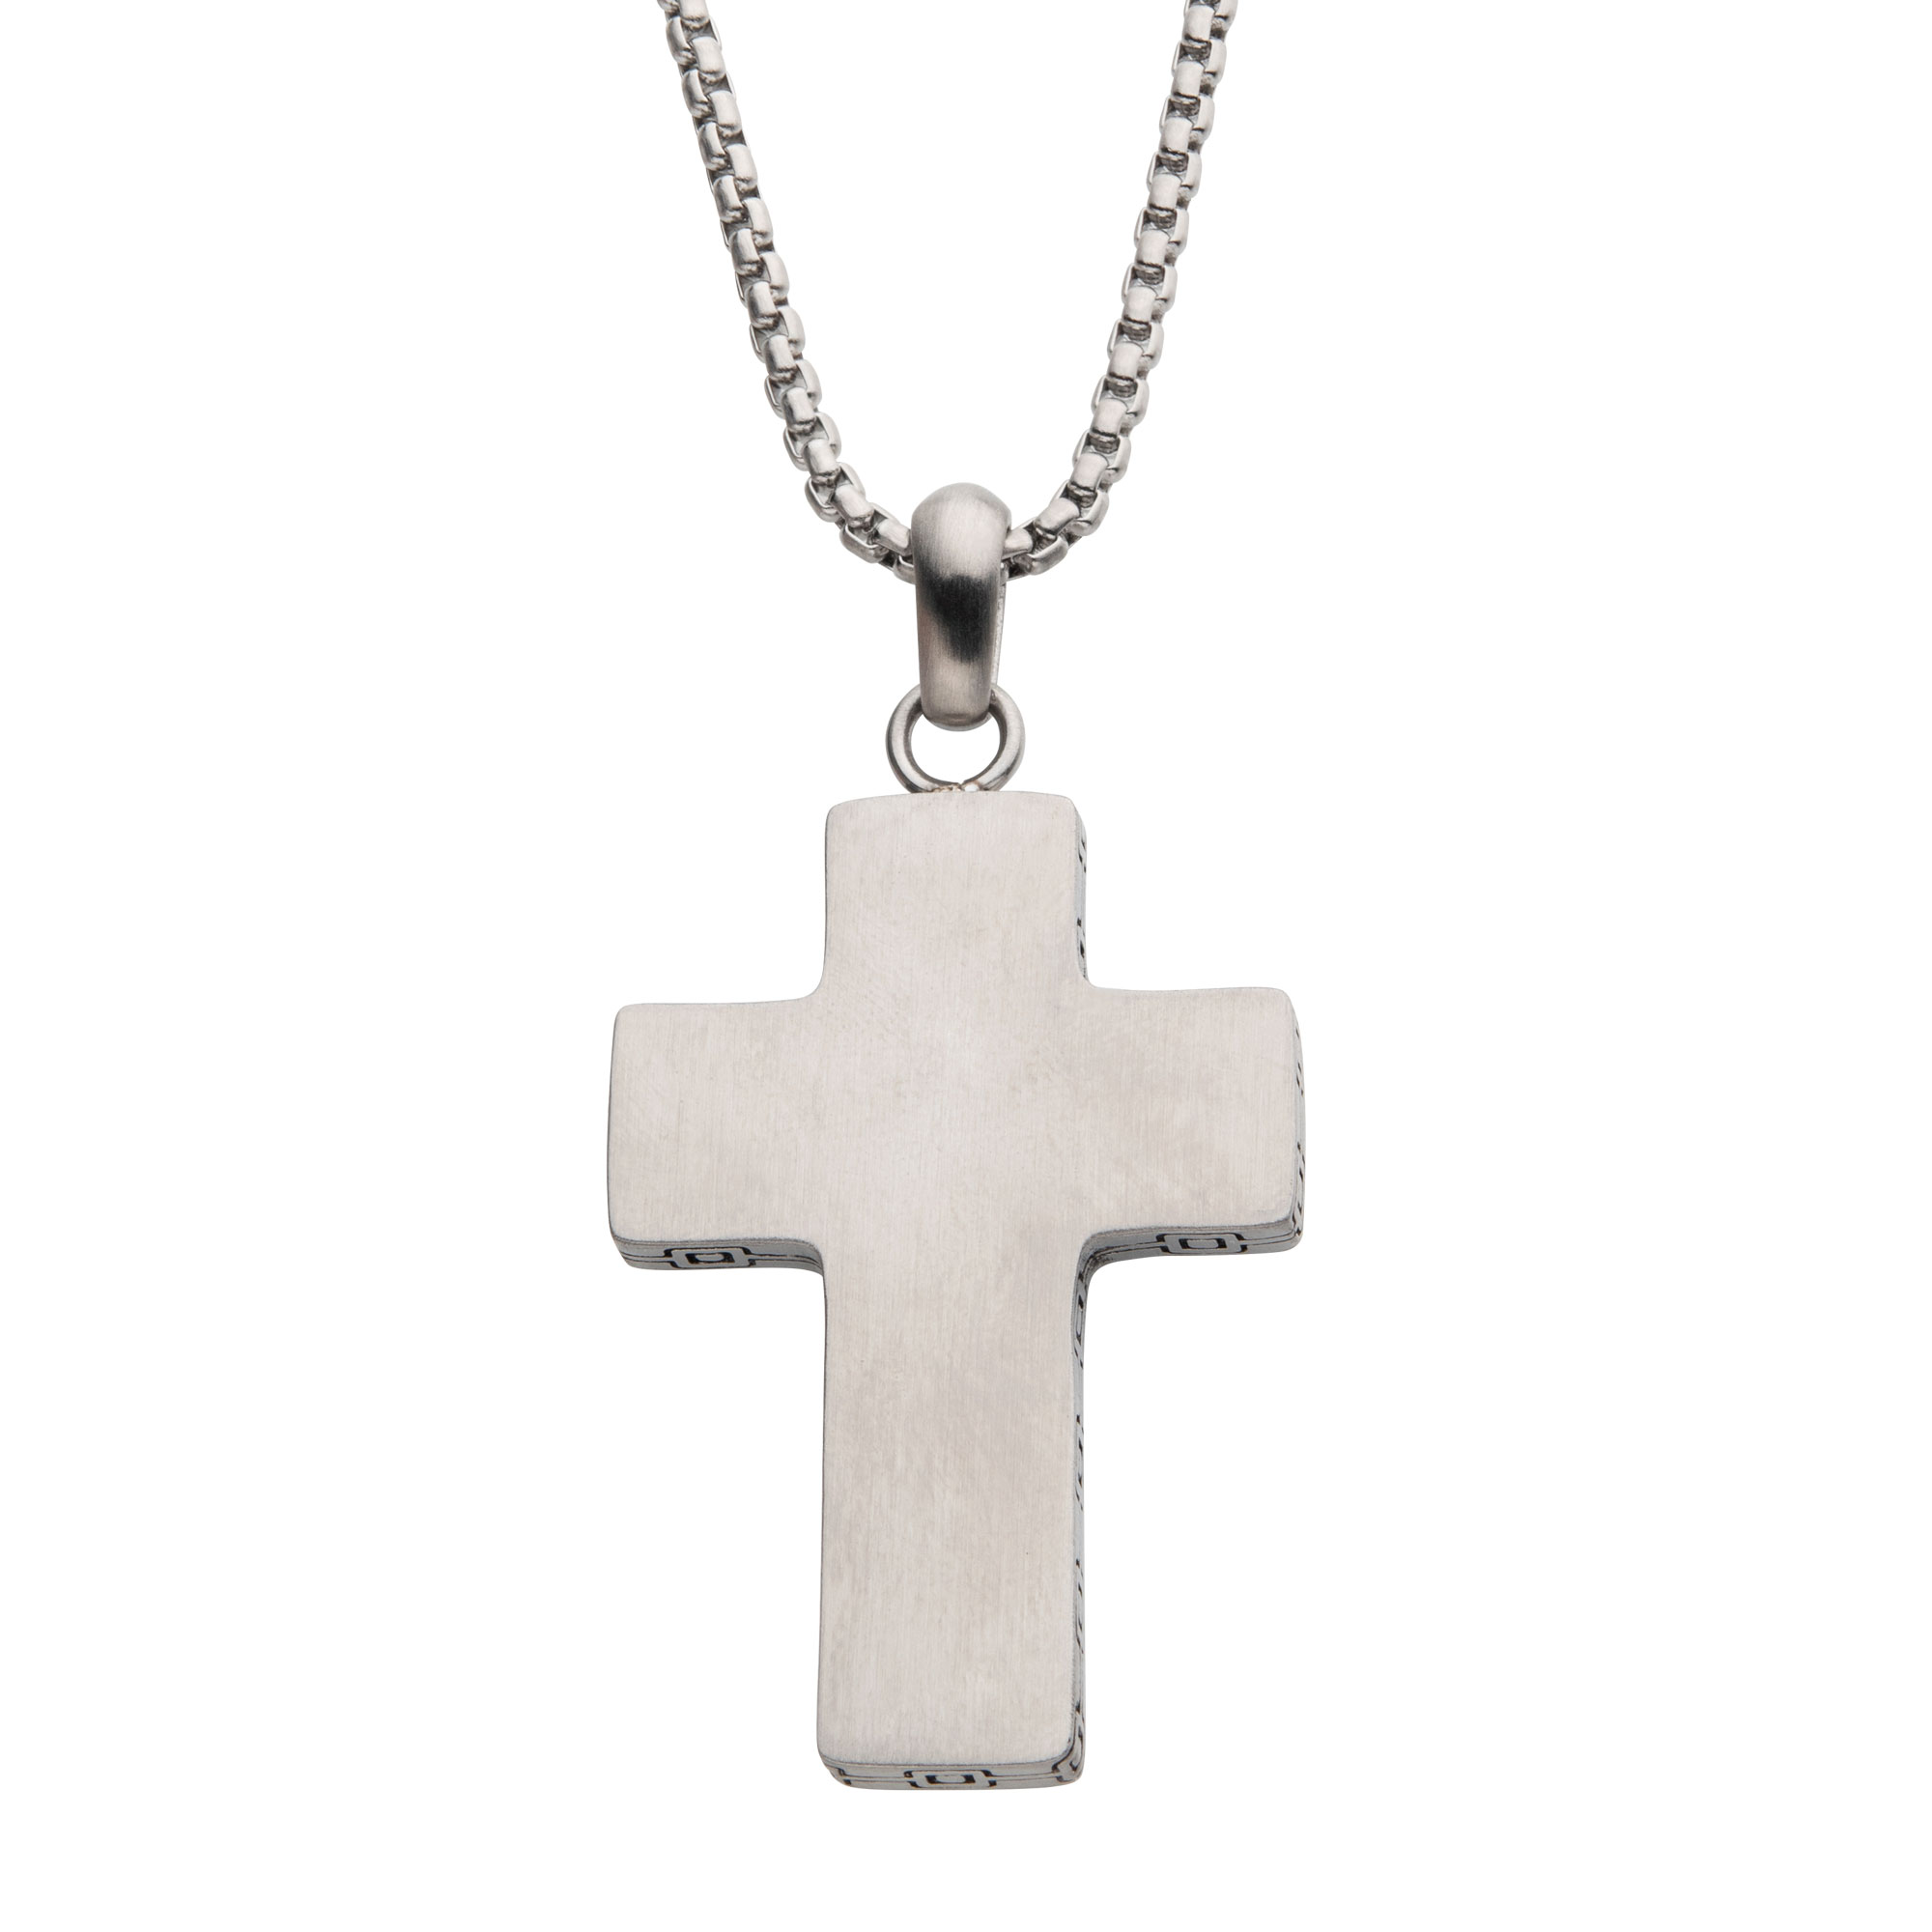 Steel Engravable Cross Pendant with Round Box Chain Morin Jewelers Southbridge, MA